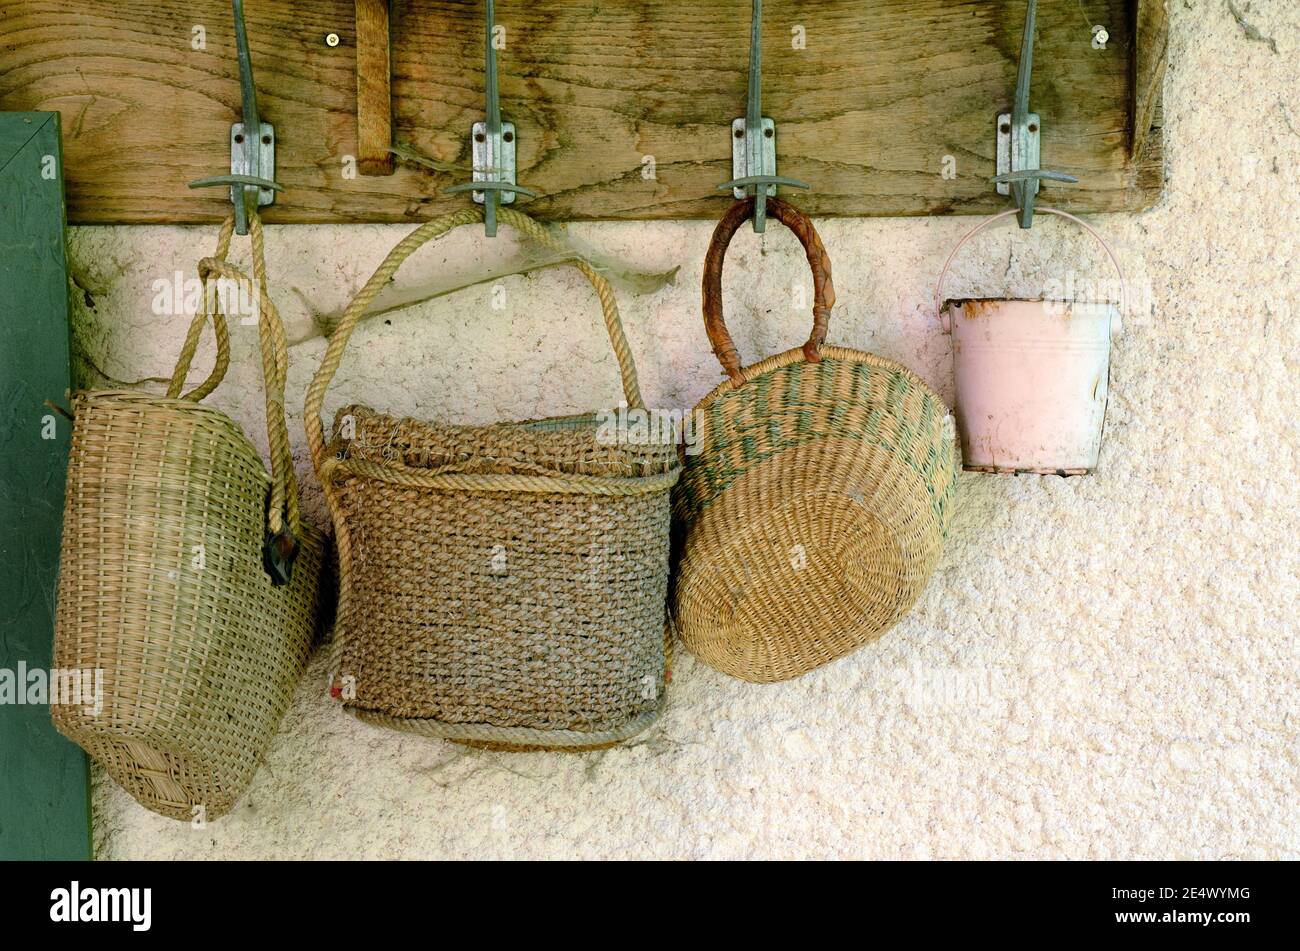 Collection or Display of Old Straw Bags or Baskets Hunging from Wall Hooks Stock Photo